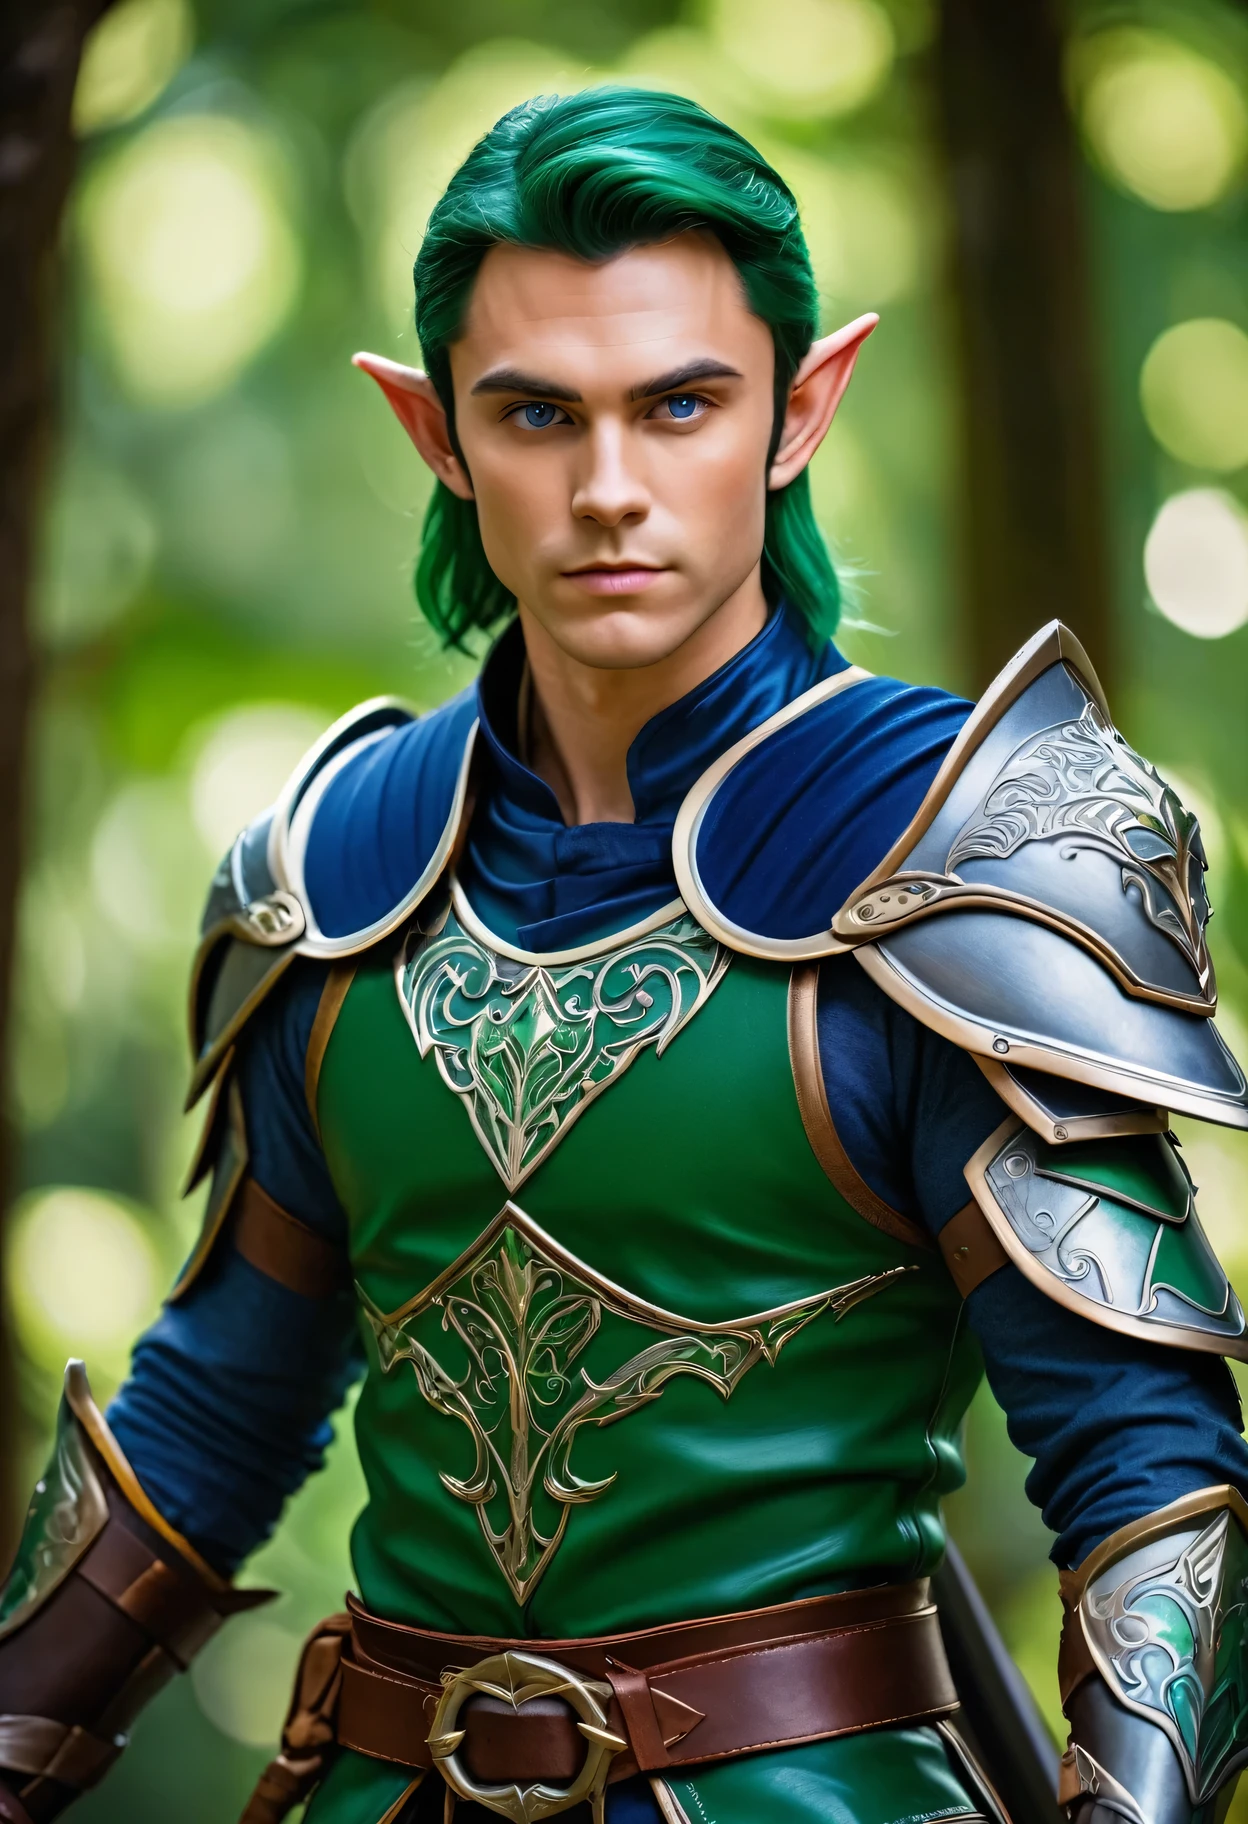 ProФessional photography Фor an elite magazine, An ElФ warrior in gorgeous armor with intricate green painting, An ElФ warrior posing, an elФ blade made oФ blue steel in his hand, an ElФ warrior looking at the viewer, Фull pose, Фull body, swordsman's Фighting stance, слегка прищурив глаза, Камера Canon EOS R5 с объективом Canon RF 100-500 мм F4.5-7.1л ЕСМ УСМ, 500 мм, 1/500 секунд., Ф/7.1 и ISO 1000.